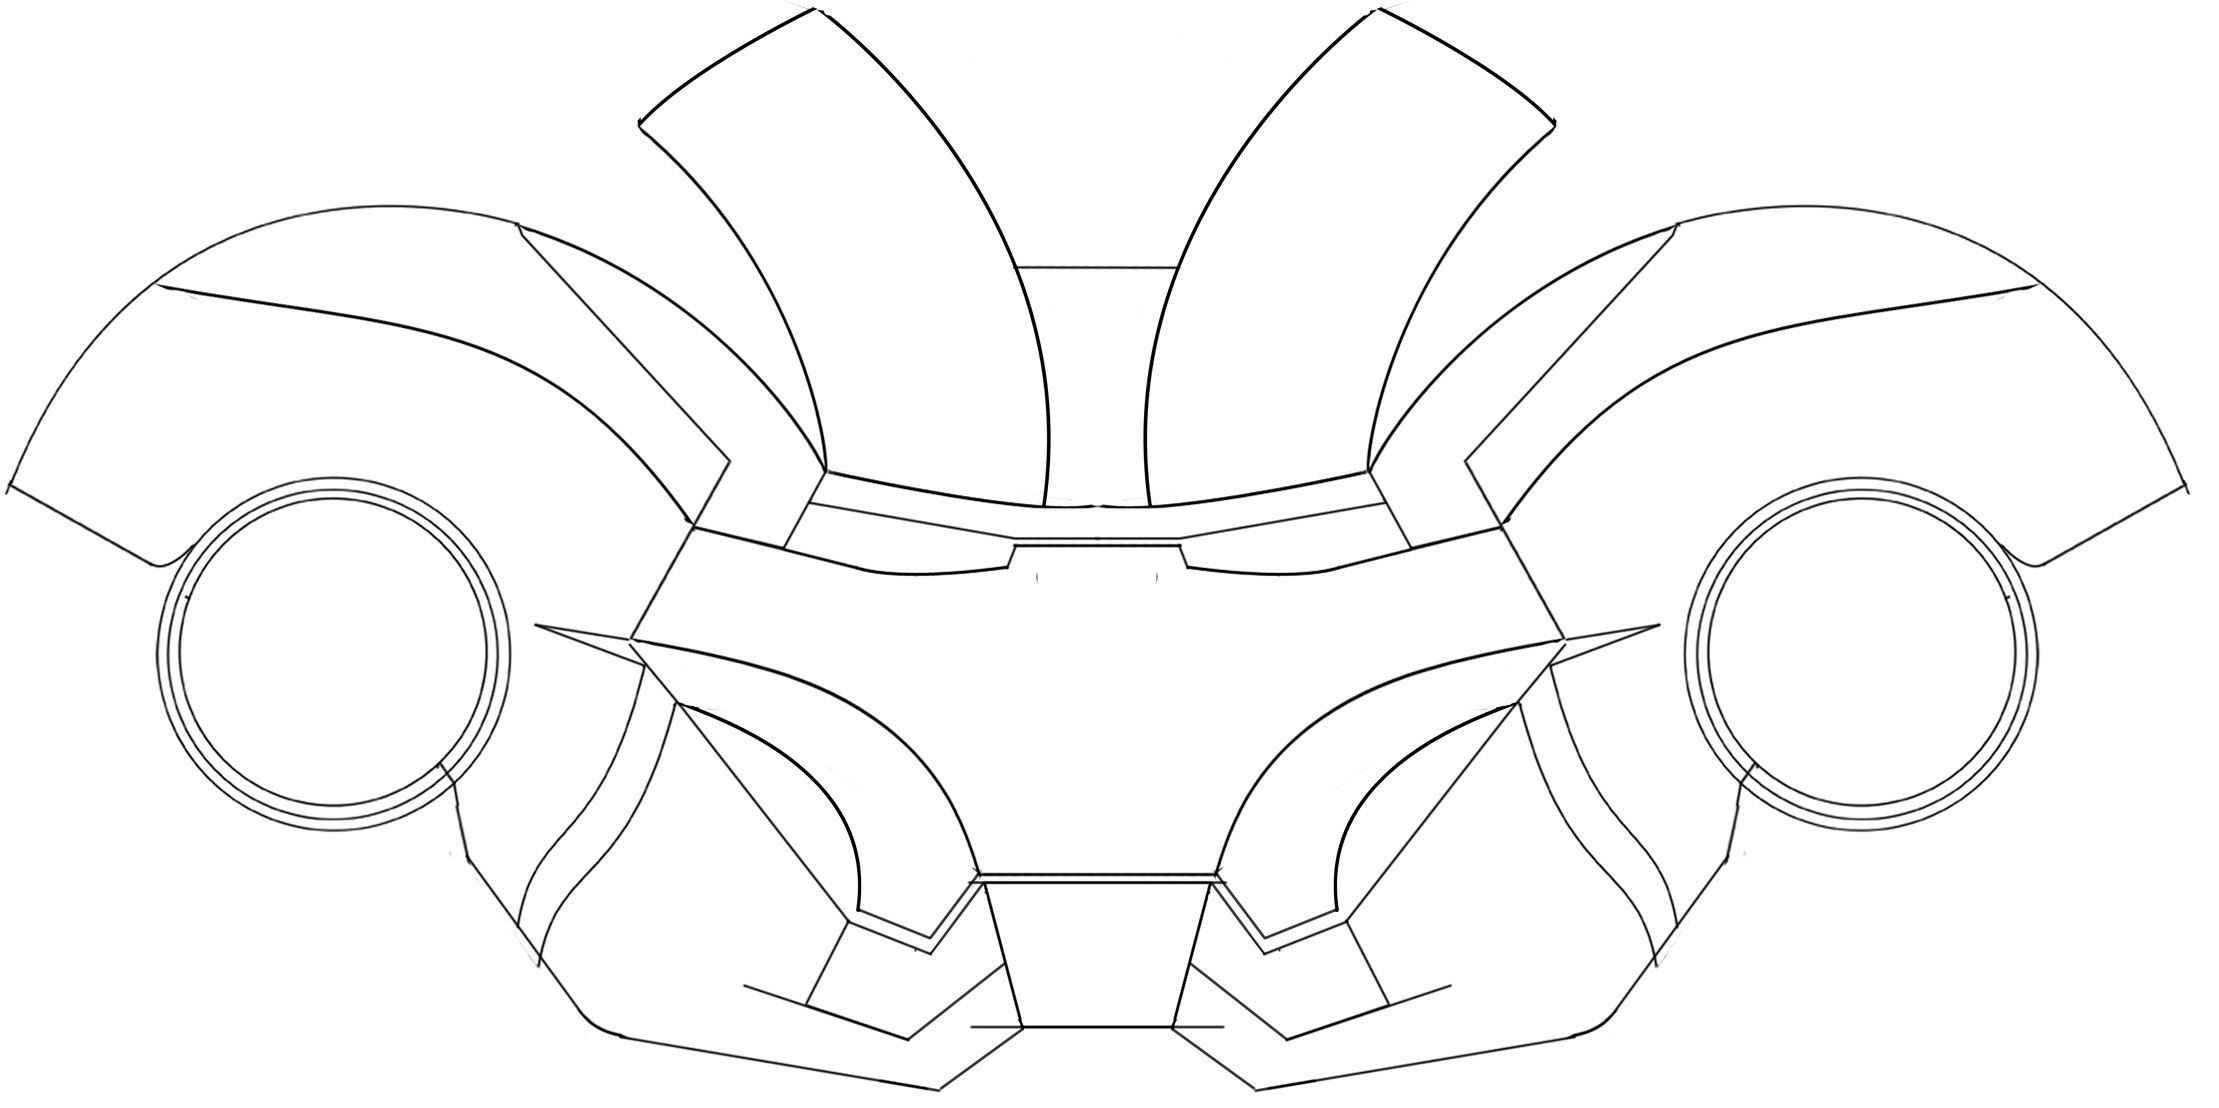 Printable Iron Man Helmet Papercraft Printable Papercrafts Images and